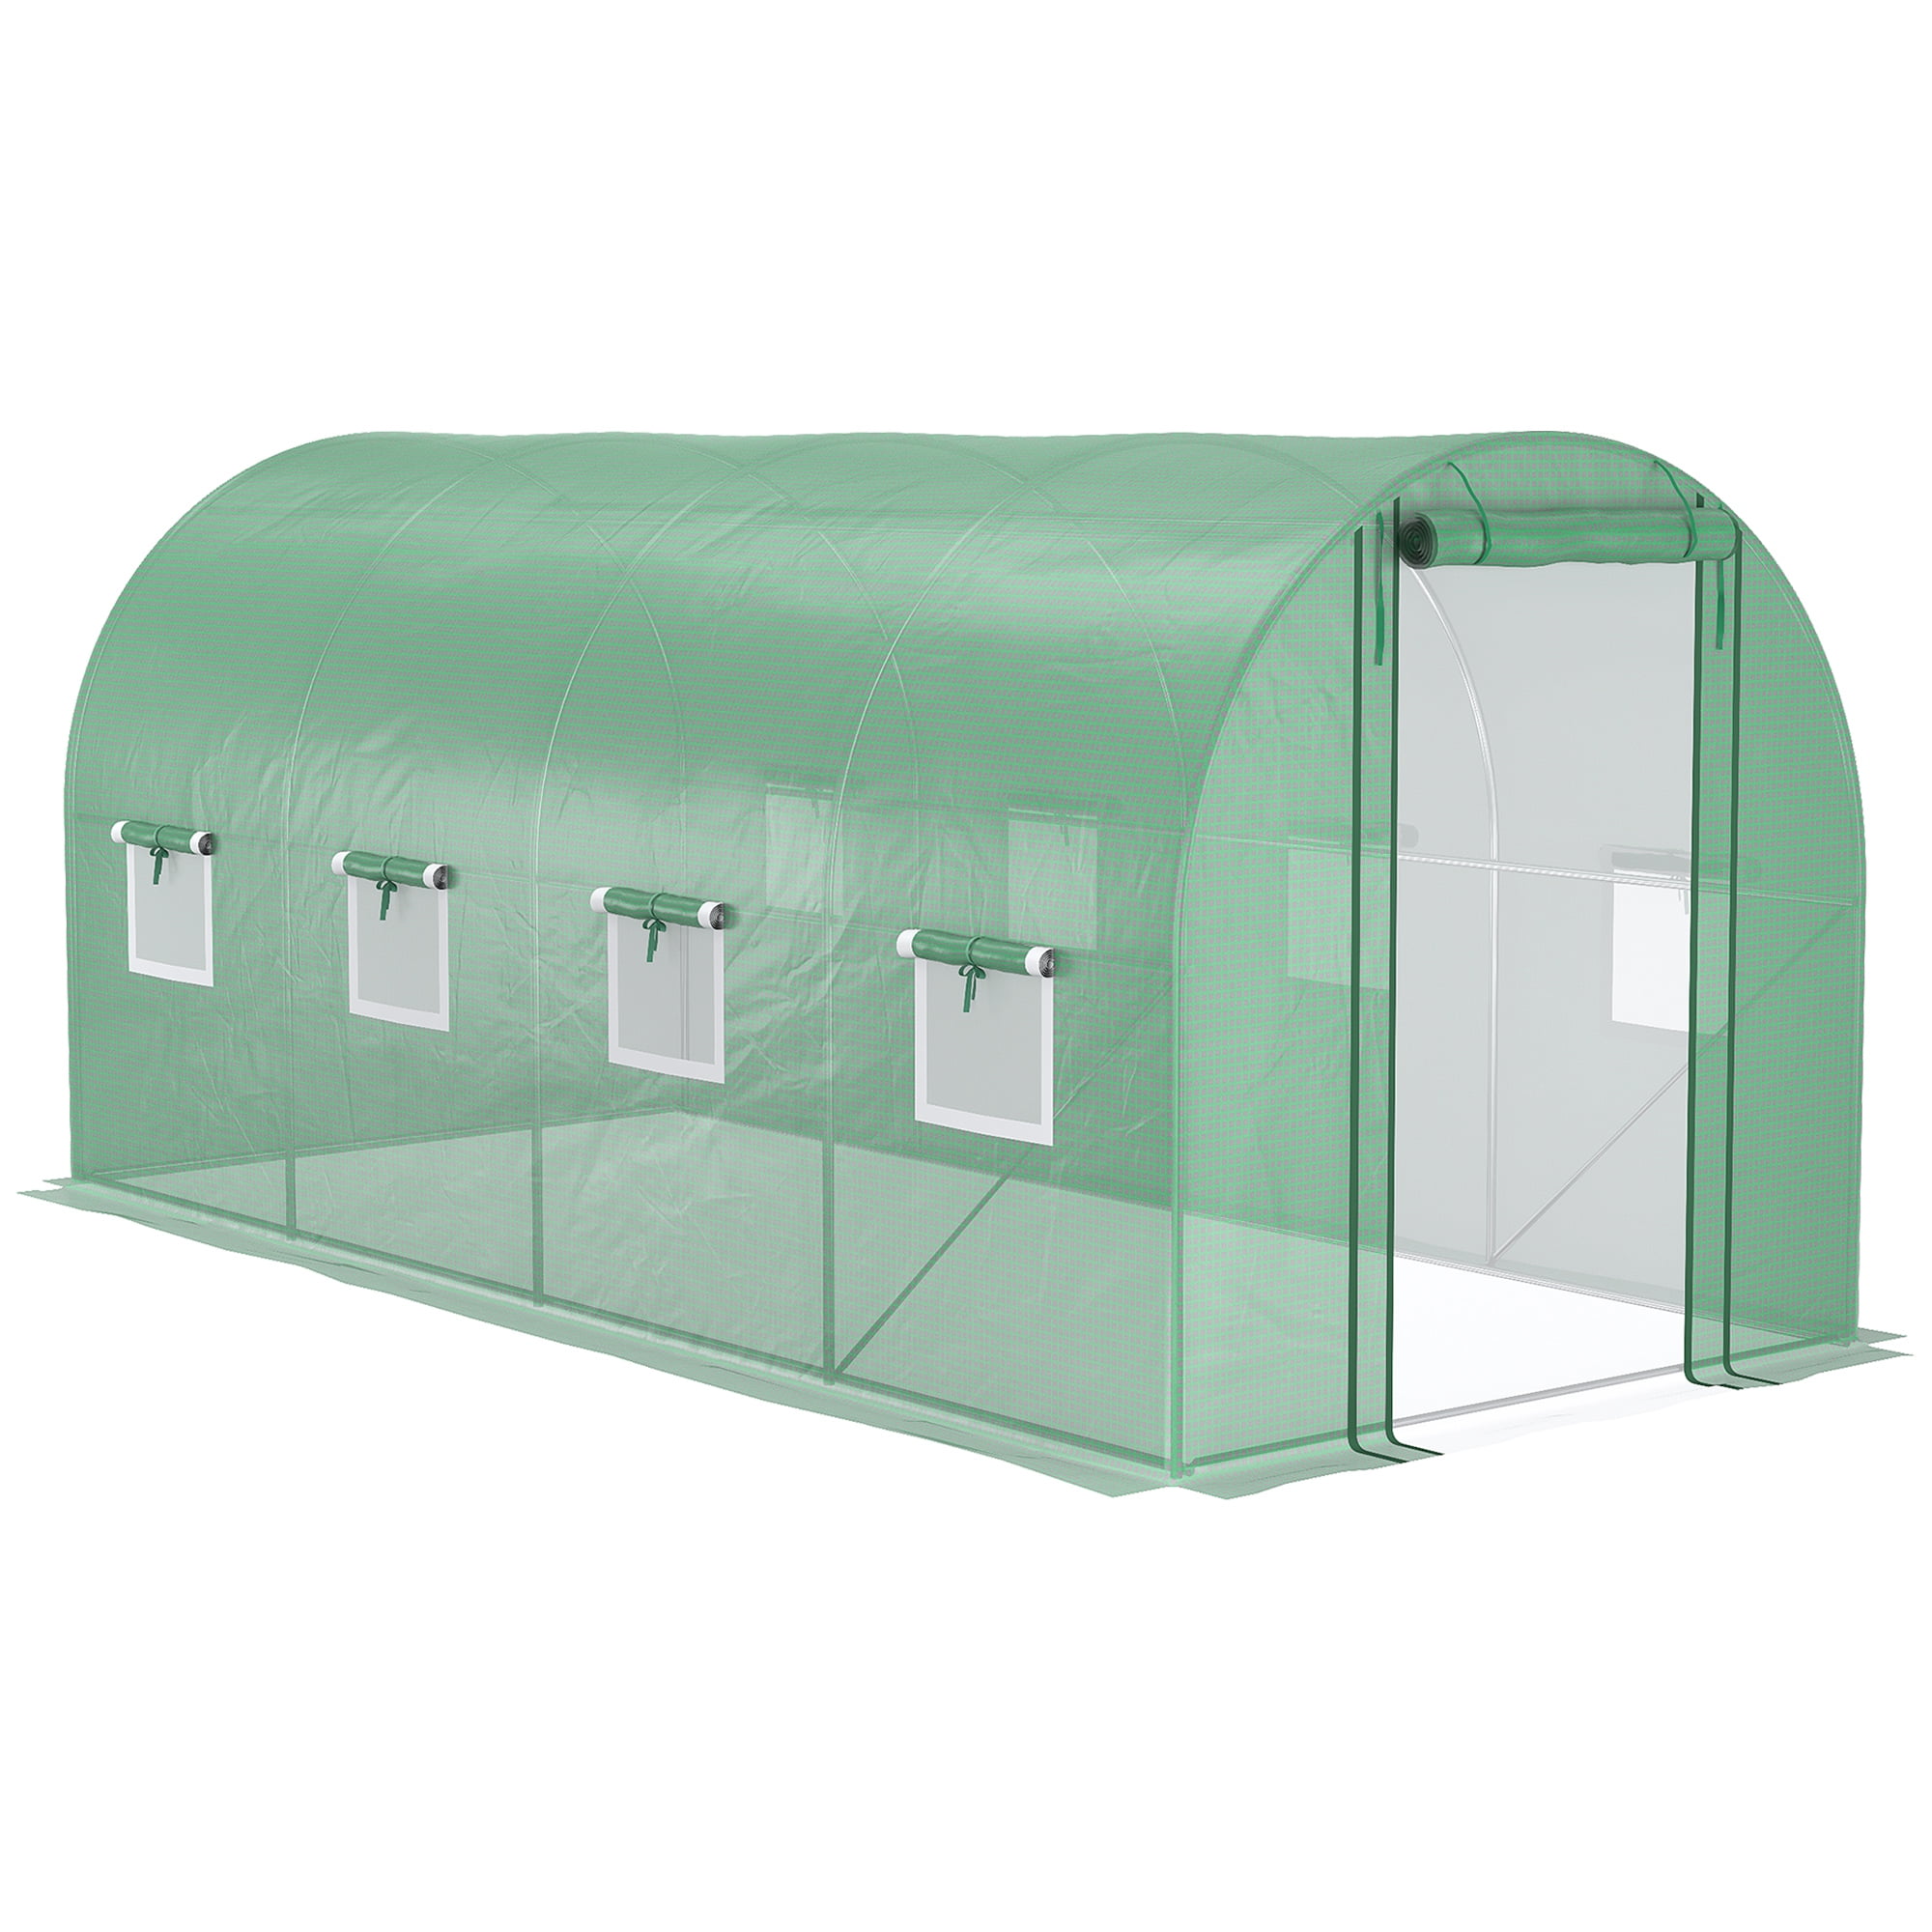 Outsunny 15' x 7' x 7' Walk-in Tunnel Hoop Greenhouse with Mesh Door ...